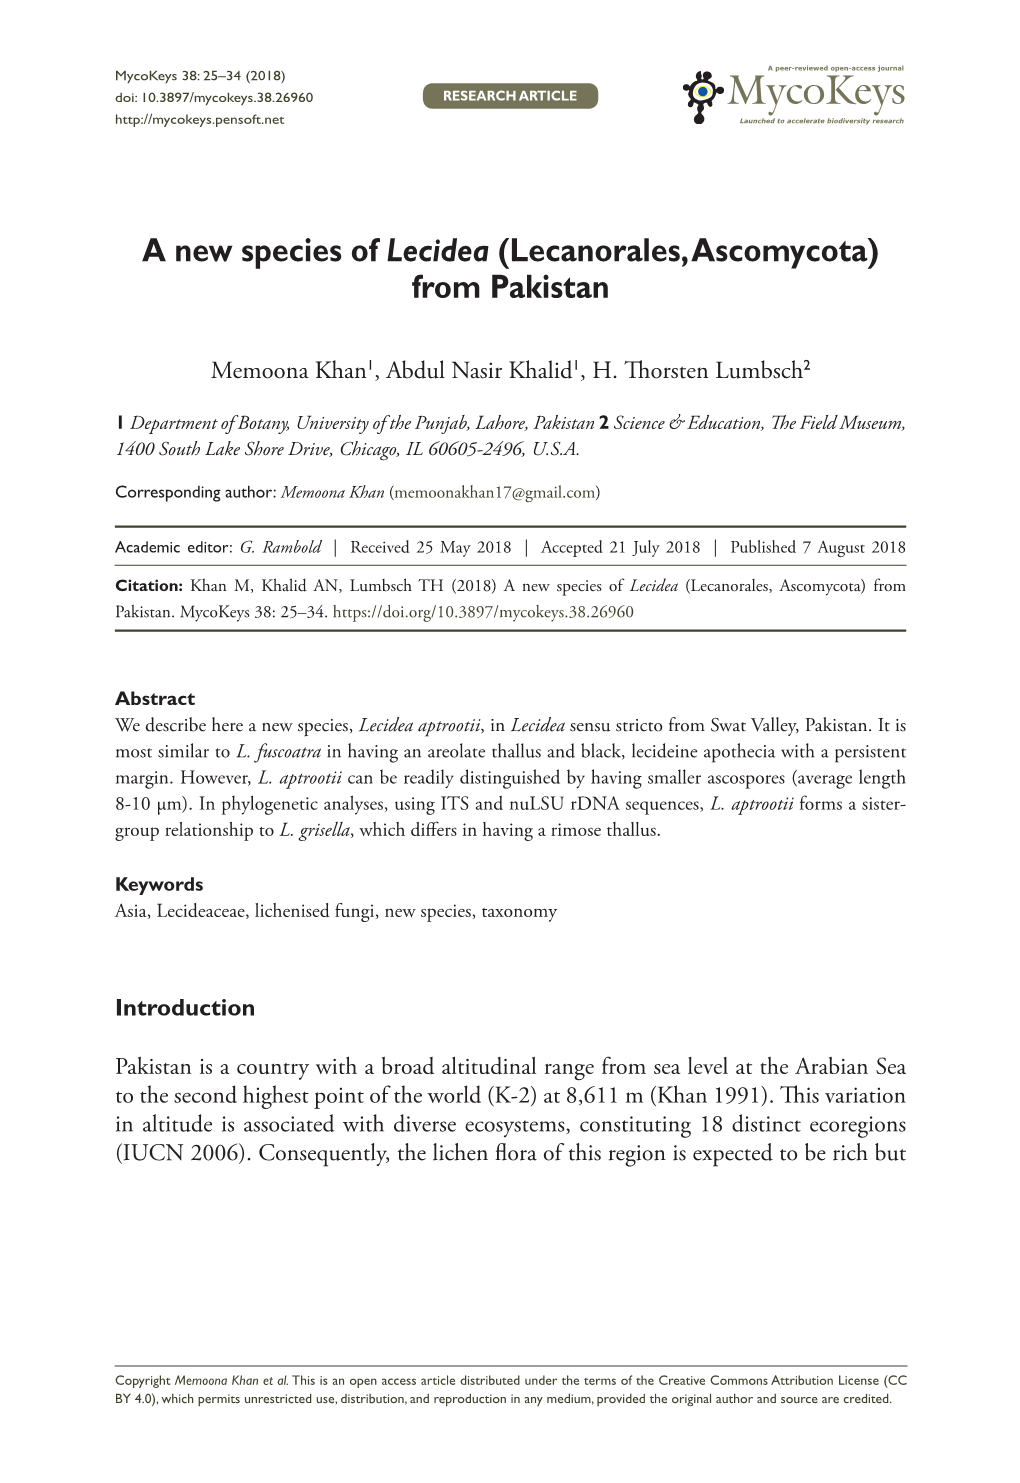 ﻿A New Species of Lecidea (Lecanorales, Ascomycota) From